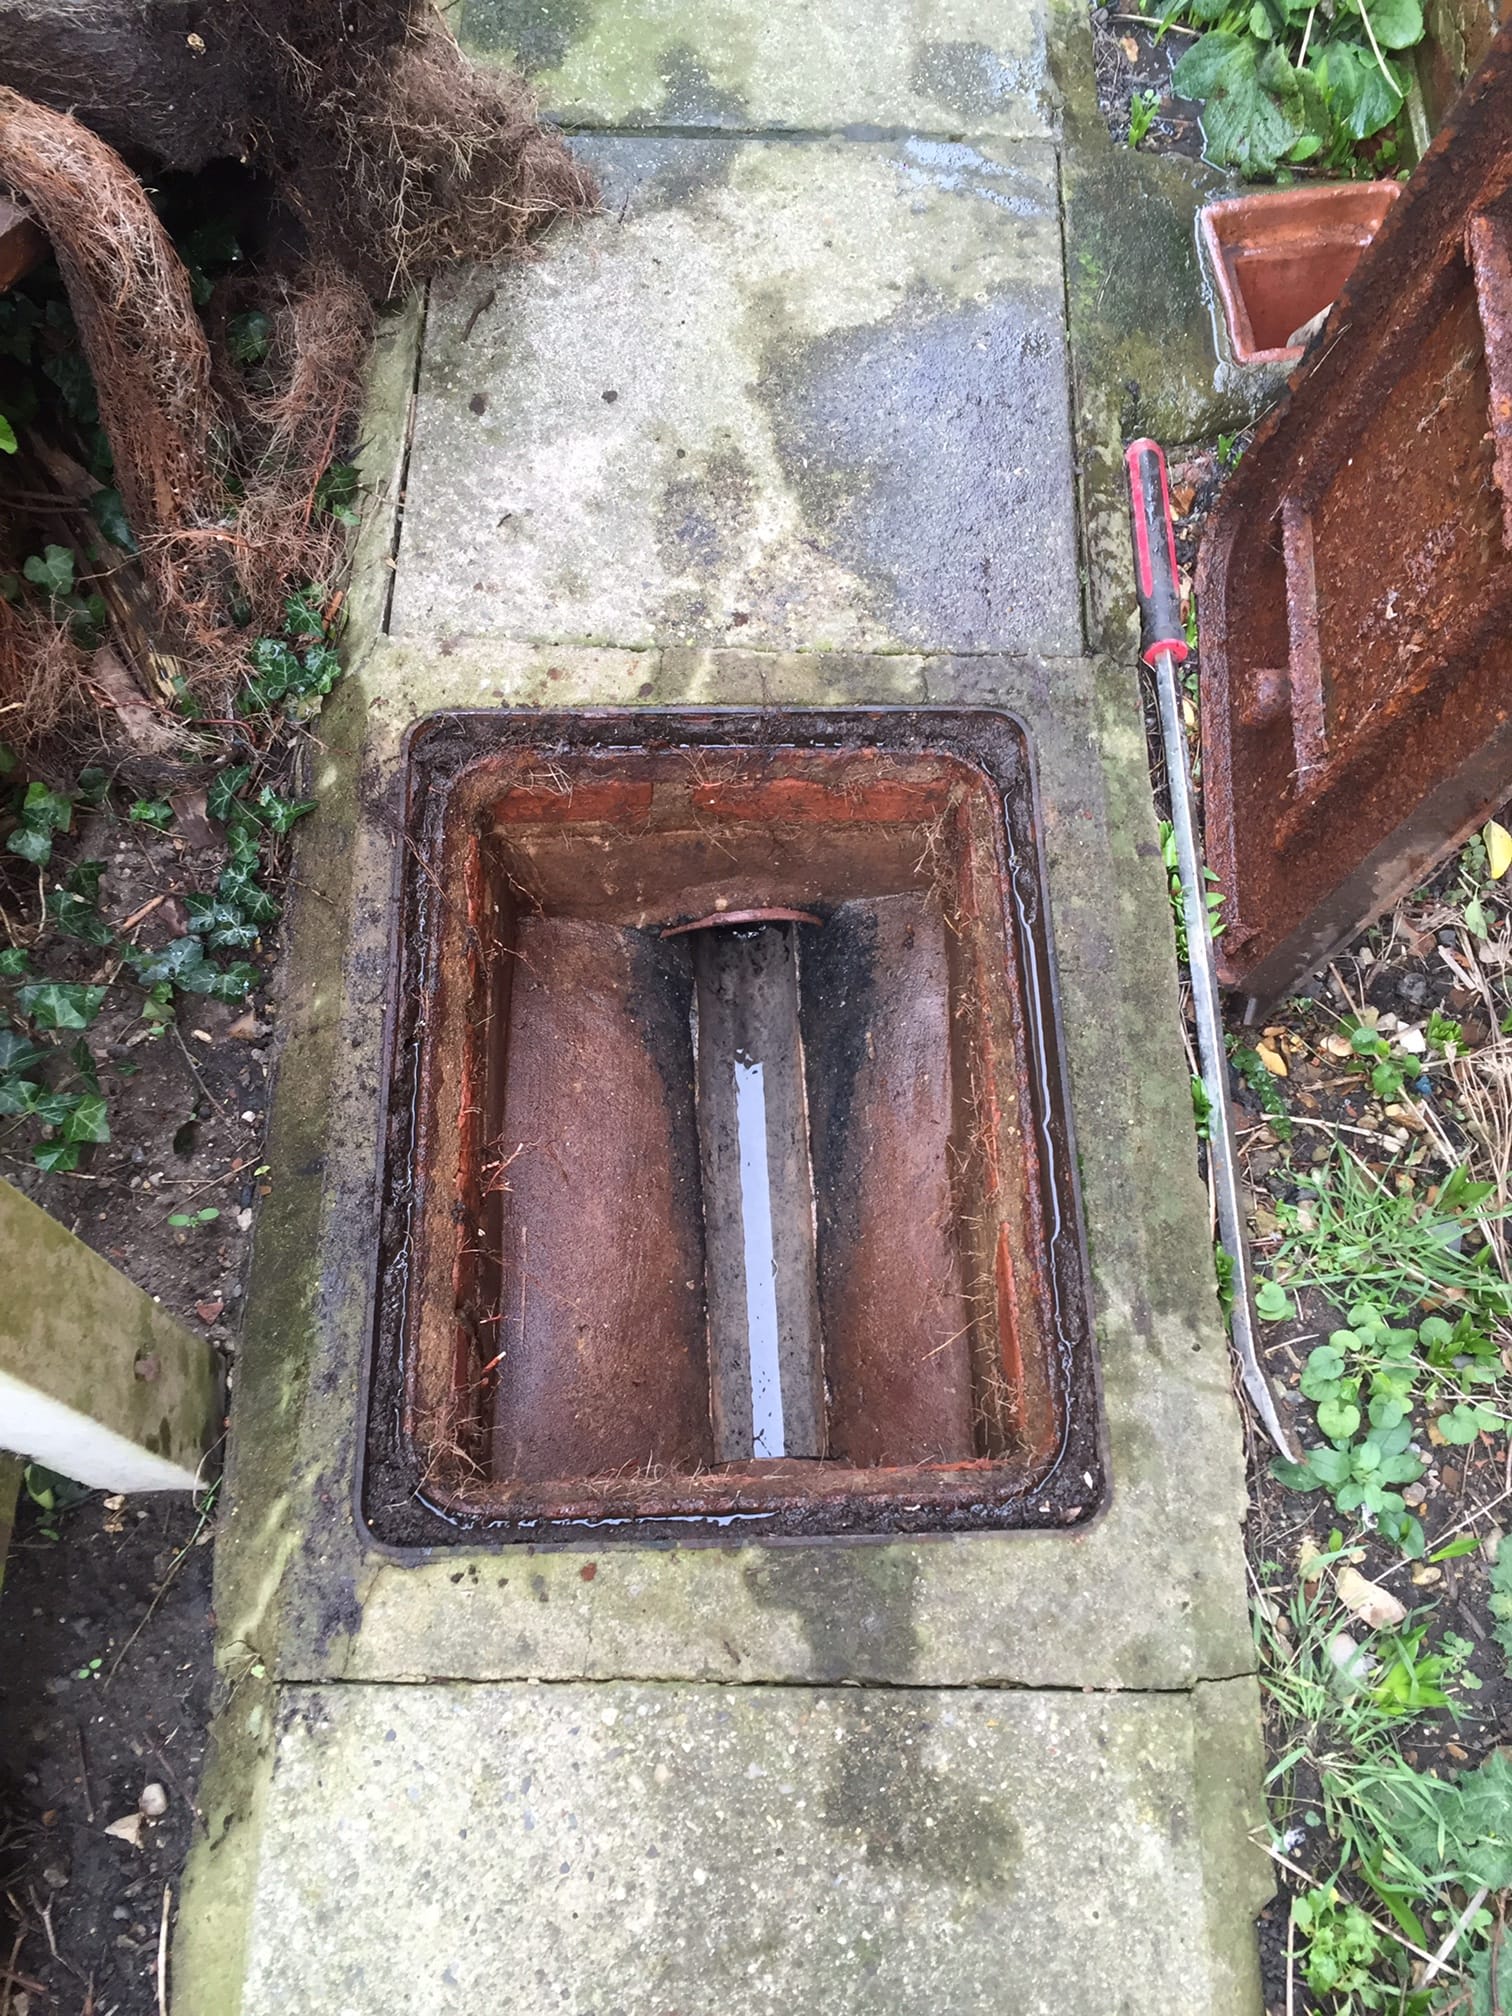 3 Flow Drainage Rochester 01634 817328